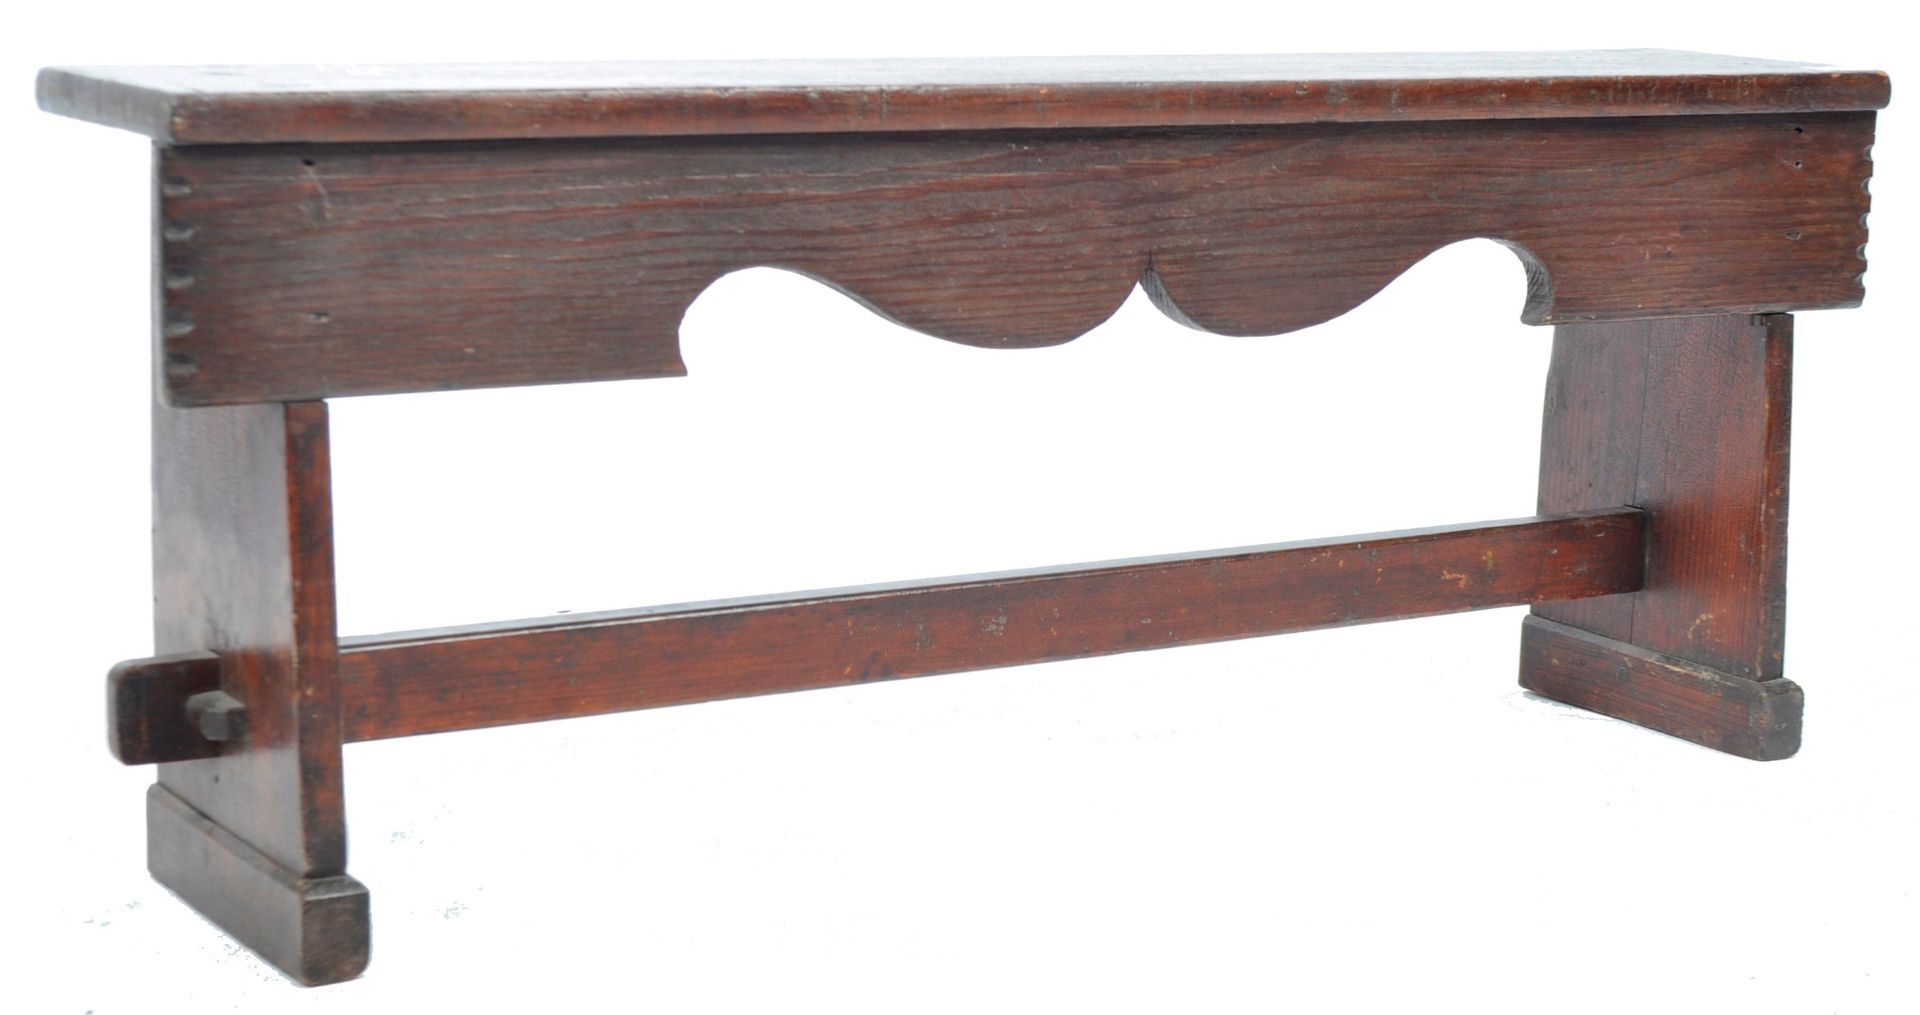 18TH CENTURY GEORGIAN COUNTRY OAK BENCH OF GOOD PROPORTIONS